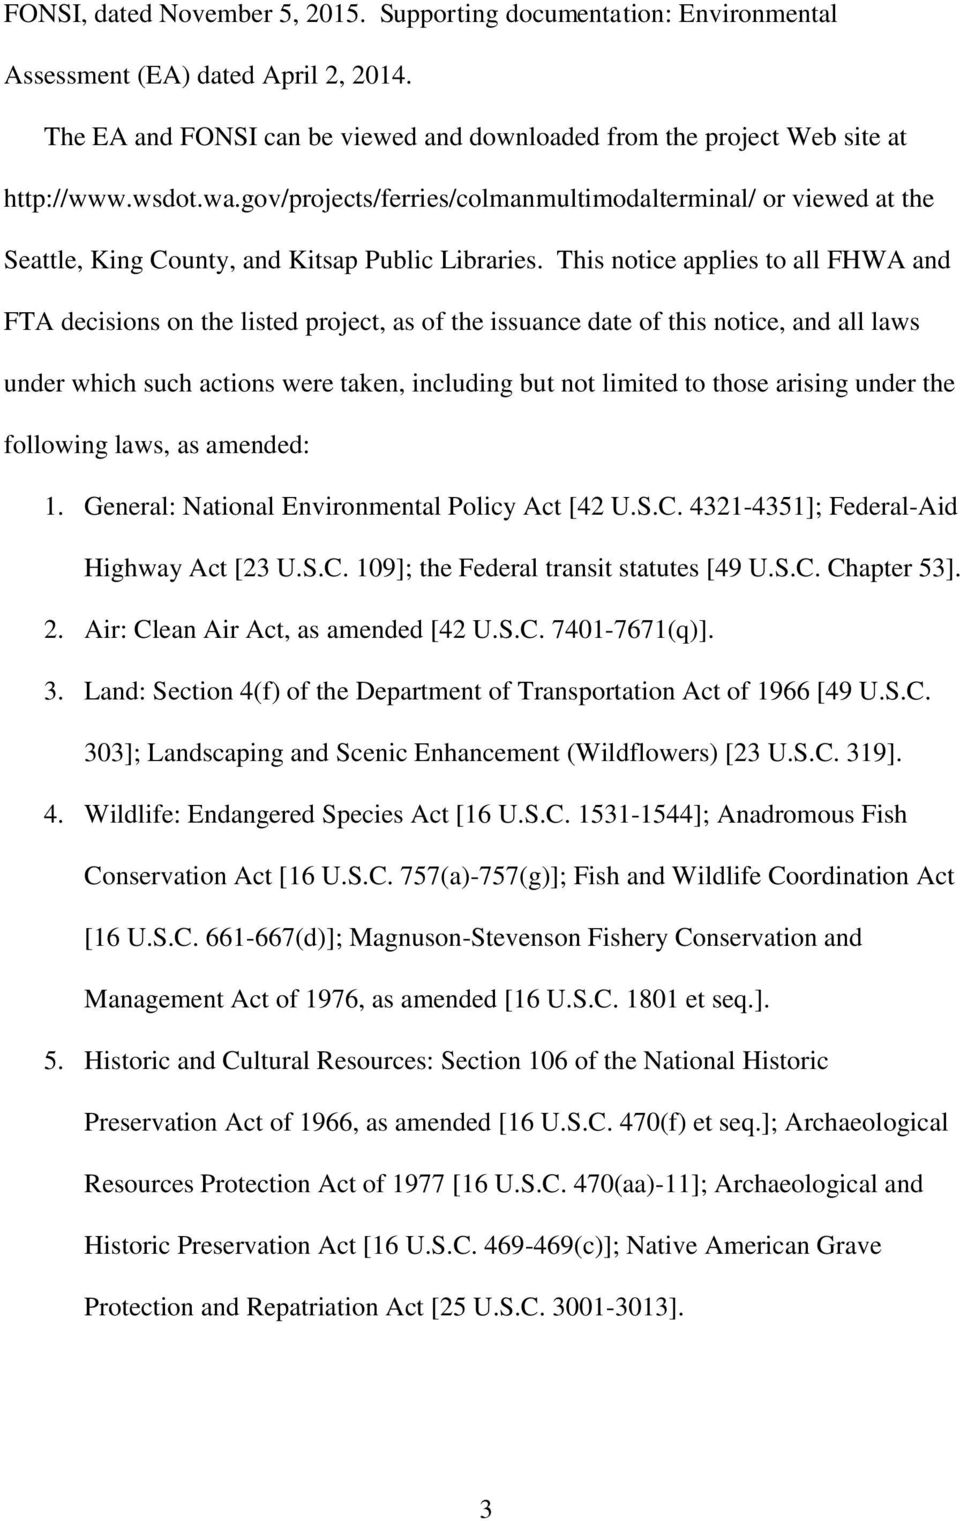 This notice applies to all FHWA and FTA decisions on the listed project, as of the issuance date of this notice, and all laws under which such actions were taken, including but not limited to those